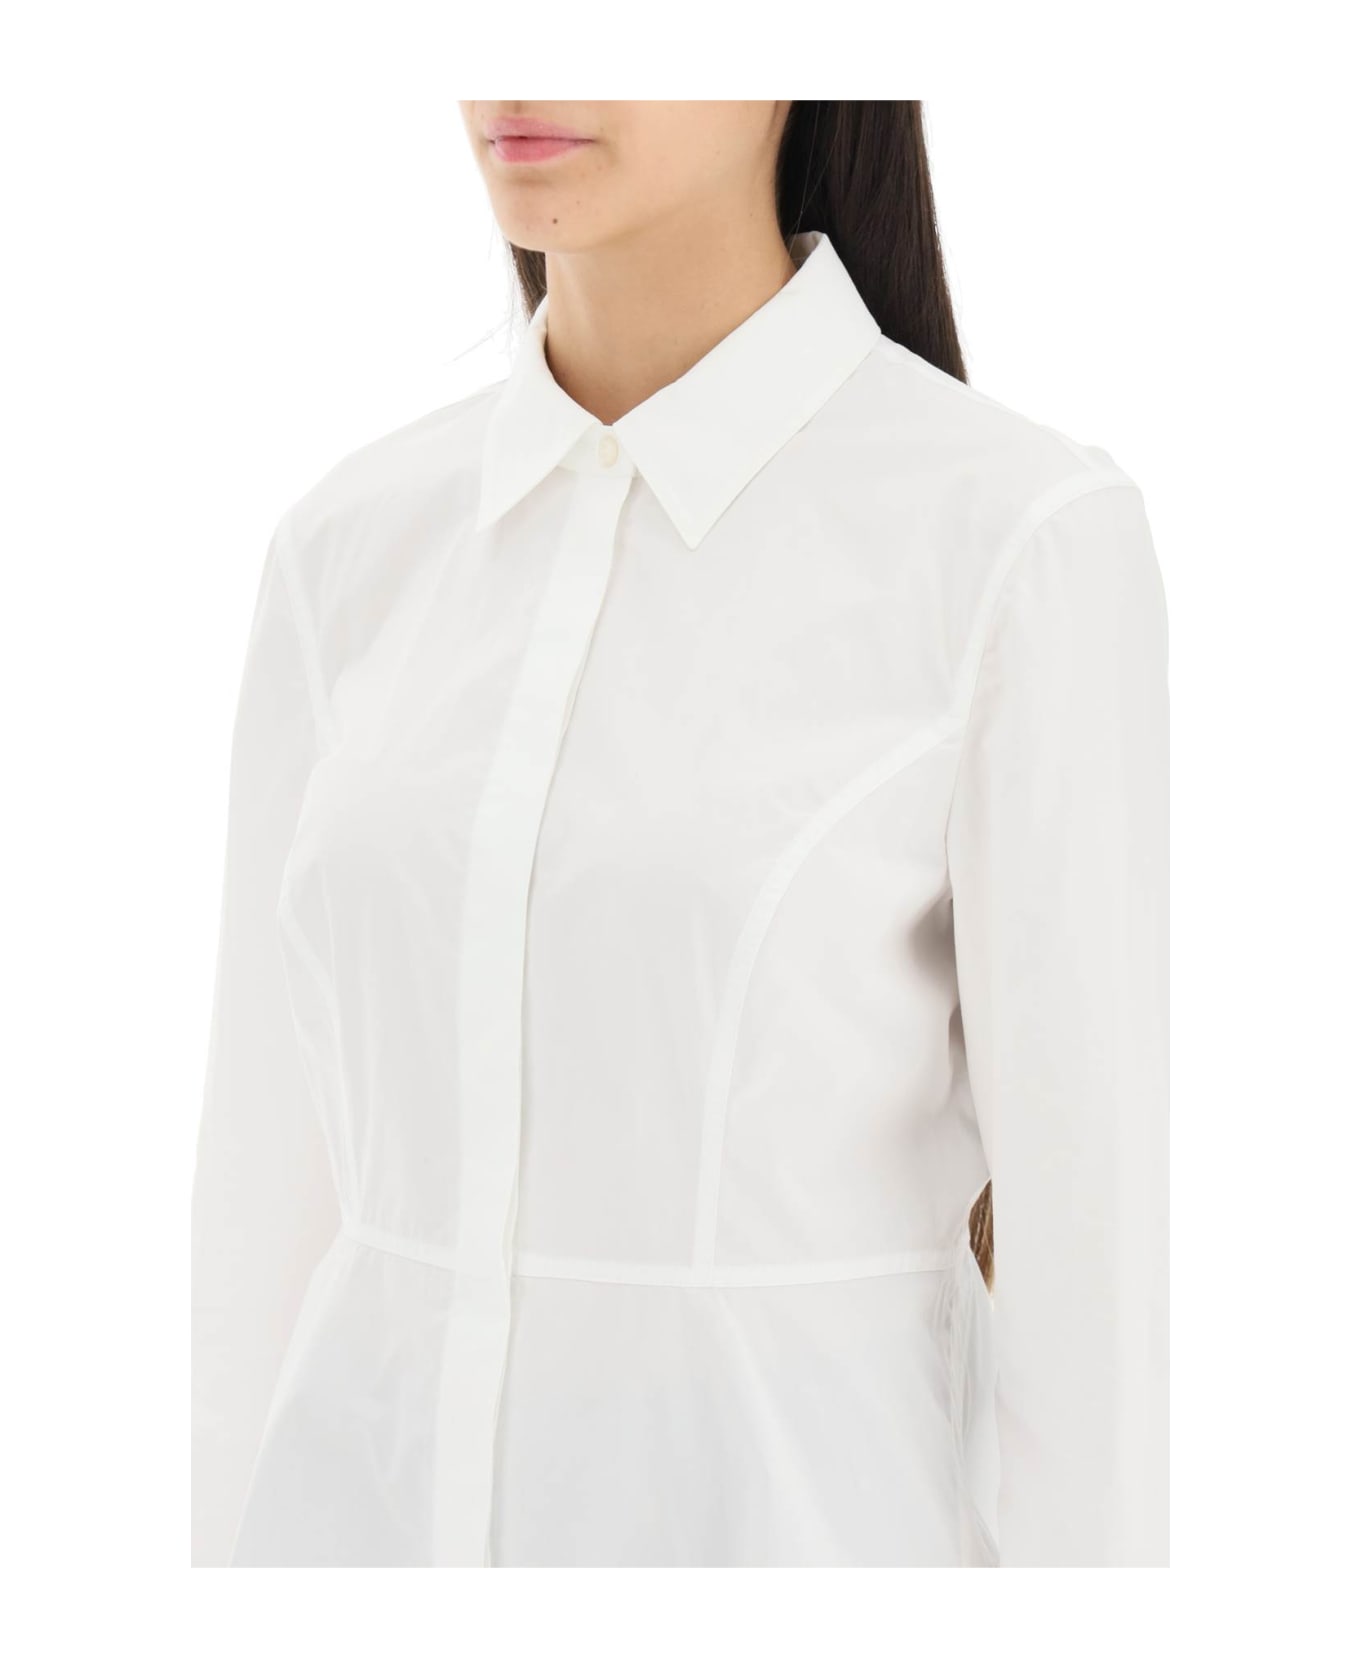 Tory Burch Shirt With Pleats - WHITE (White)